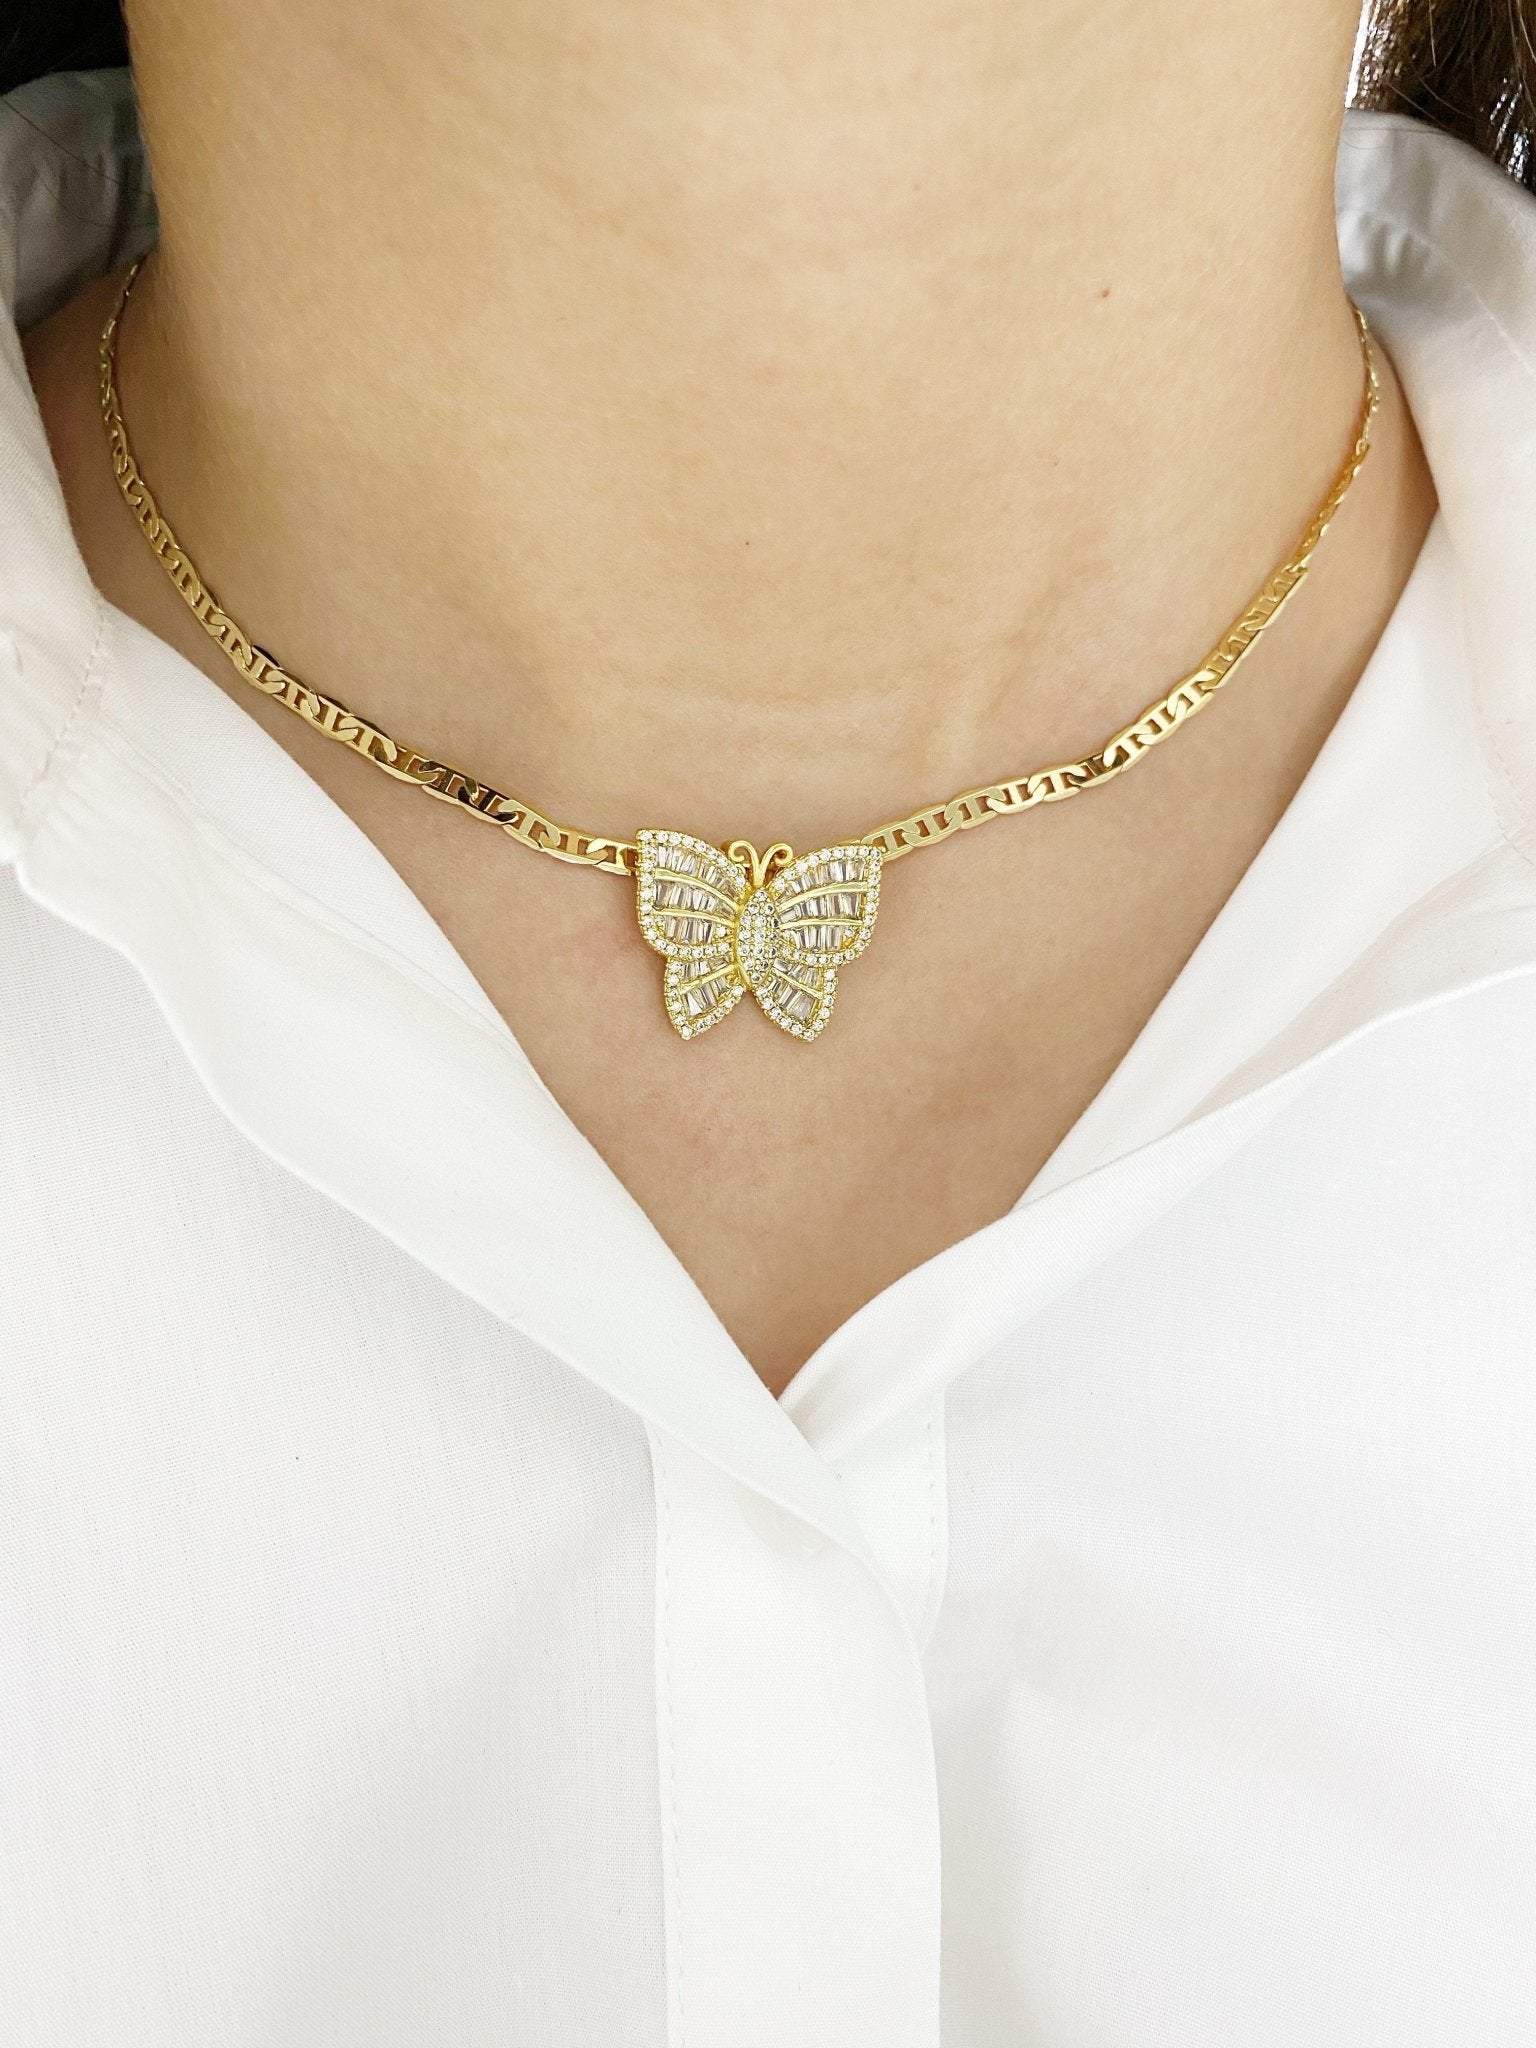 Butterfly Baguette Necklace ROSE -  Skin Molding Chain